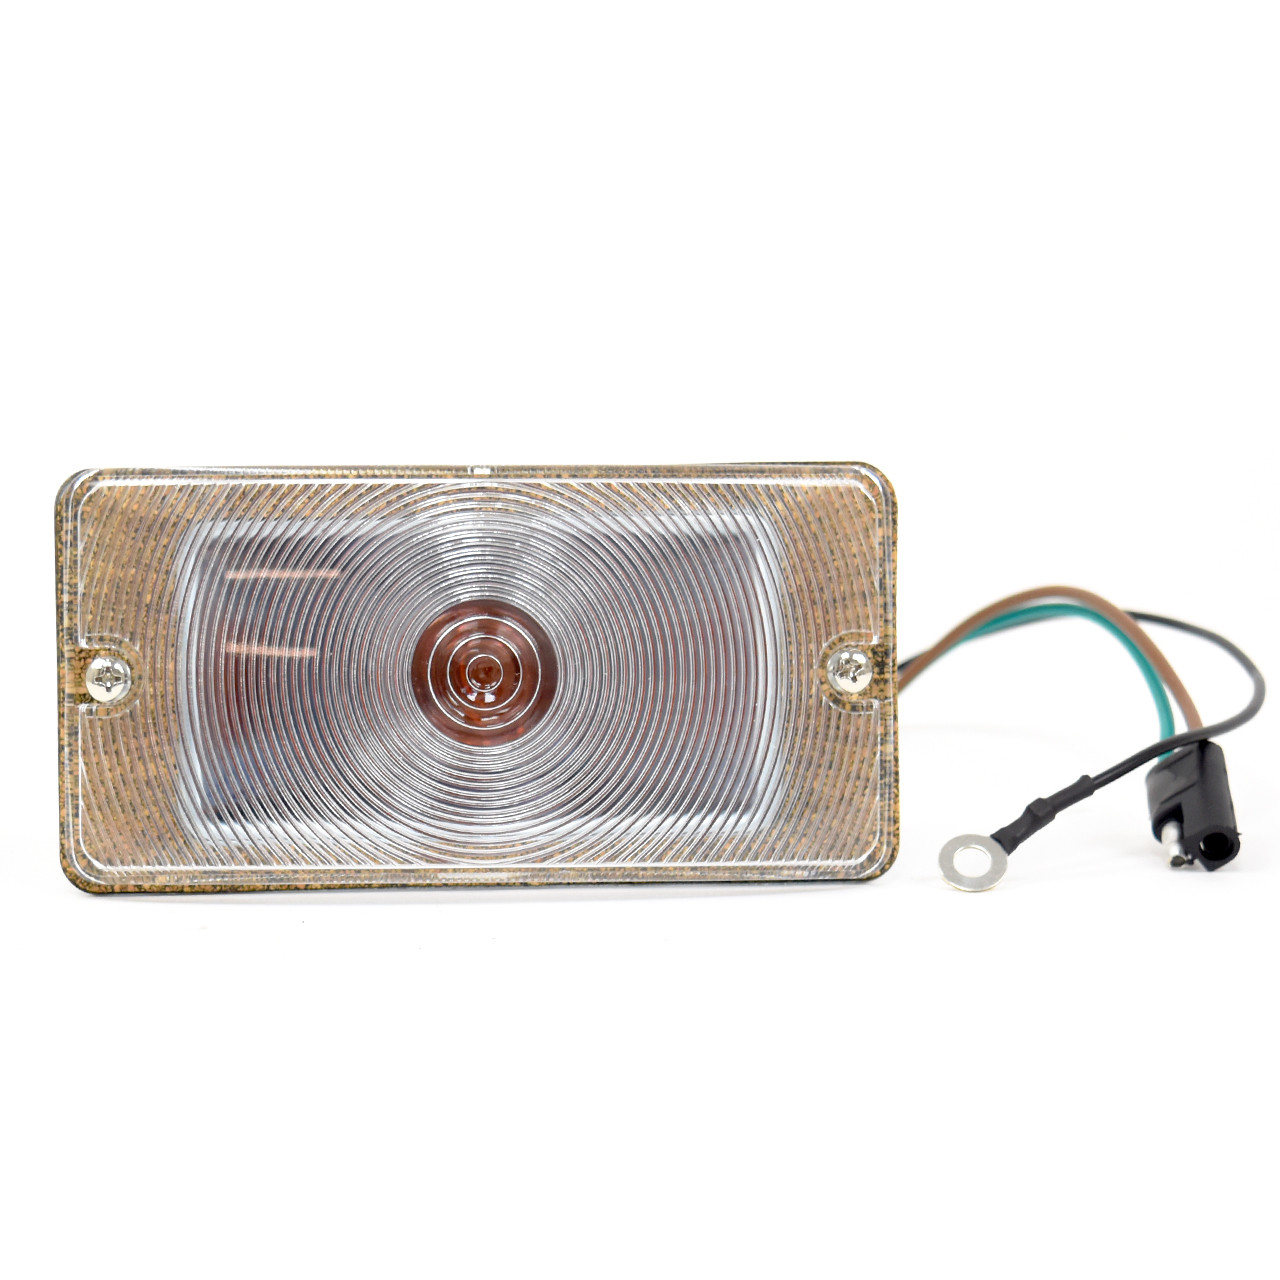 Turn Signal Parking Light Assembly With Clear Lens Fits LH or RH [FB-BP002A]